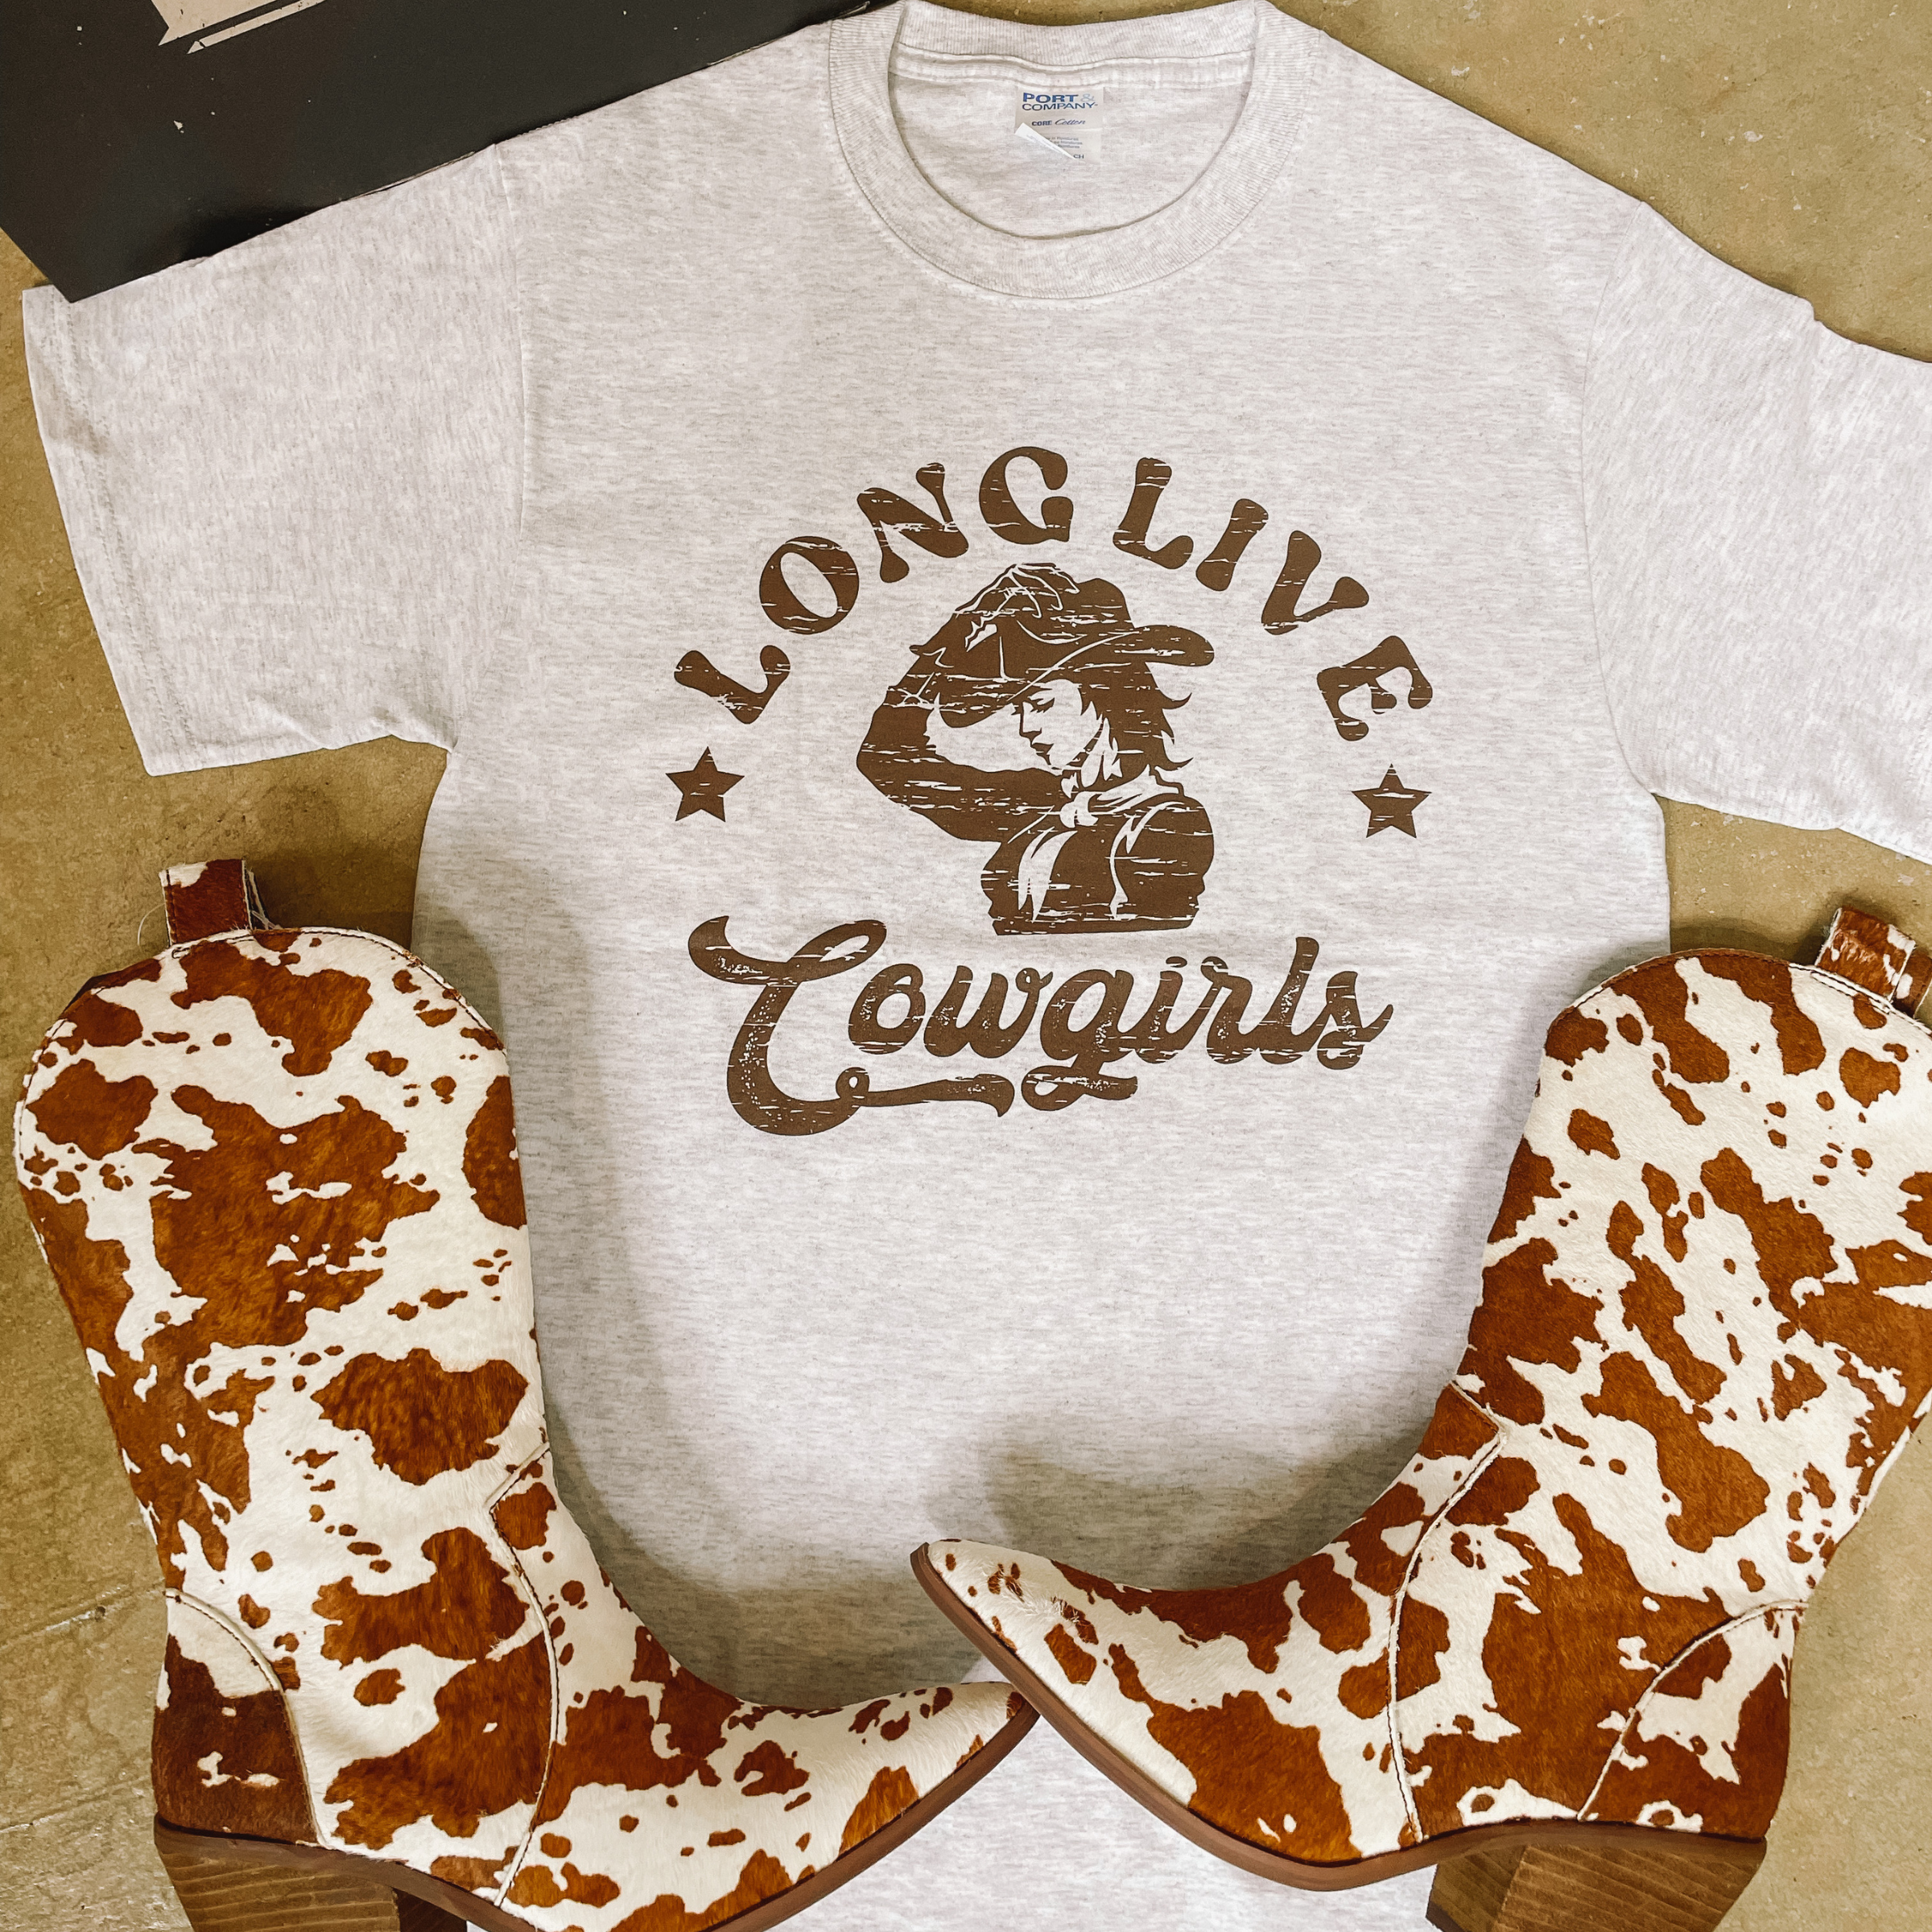 Long Live Cowgirls Print Short Sleeve Graphic Tee in Heather Grey - Giddy Up Glamour Boutique